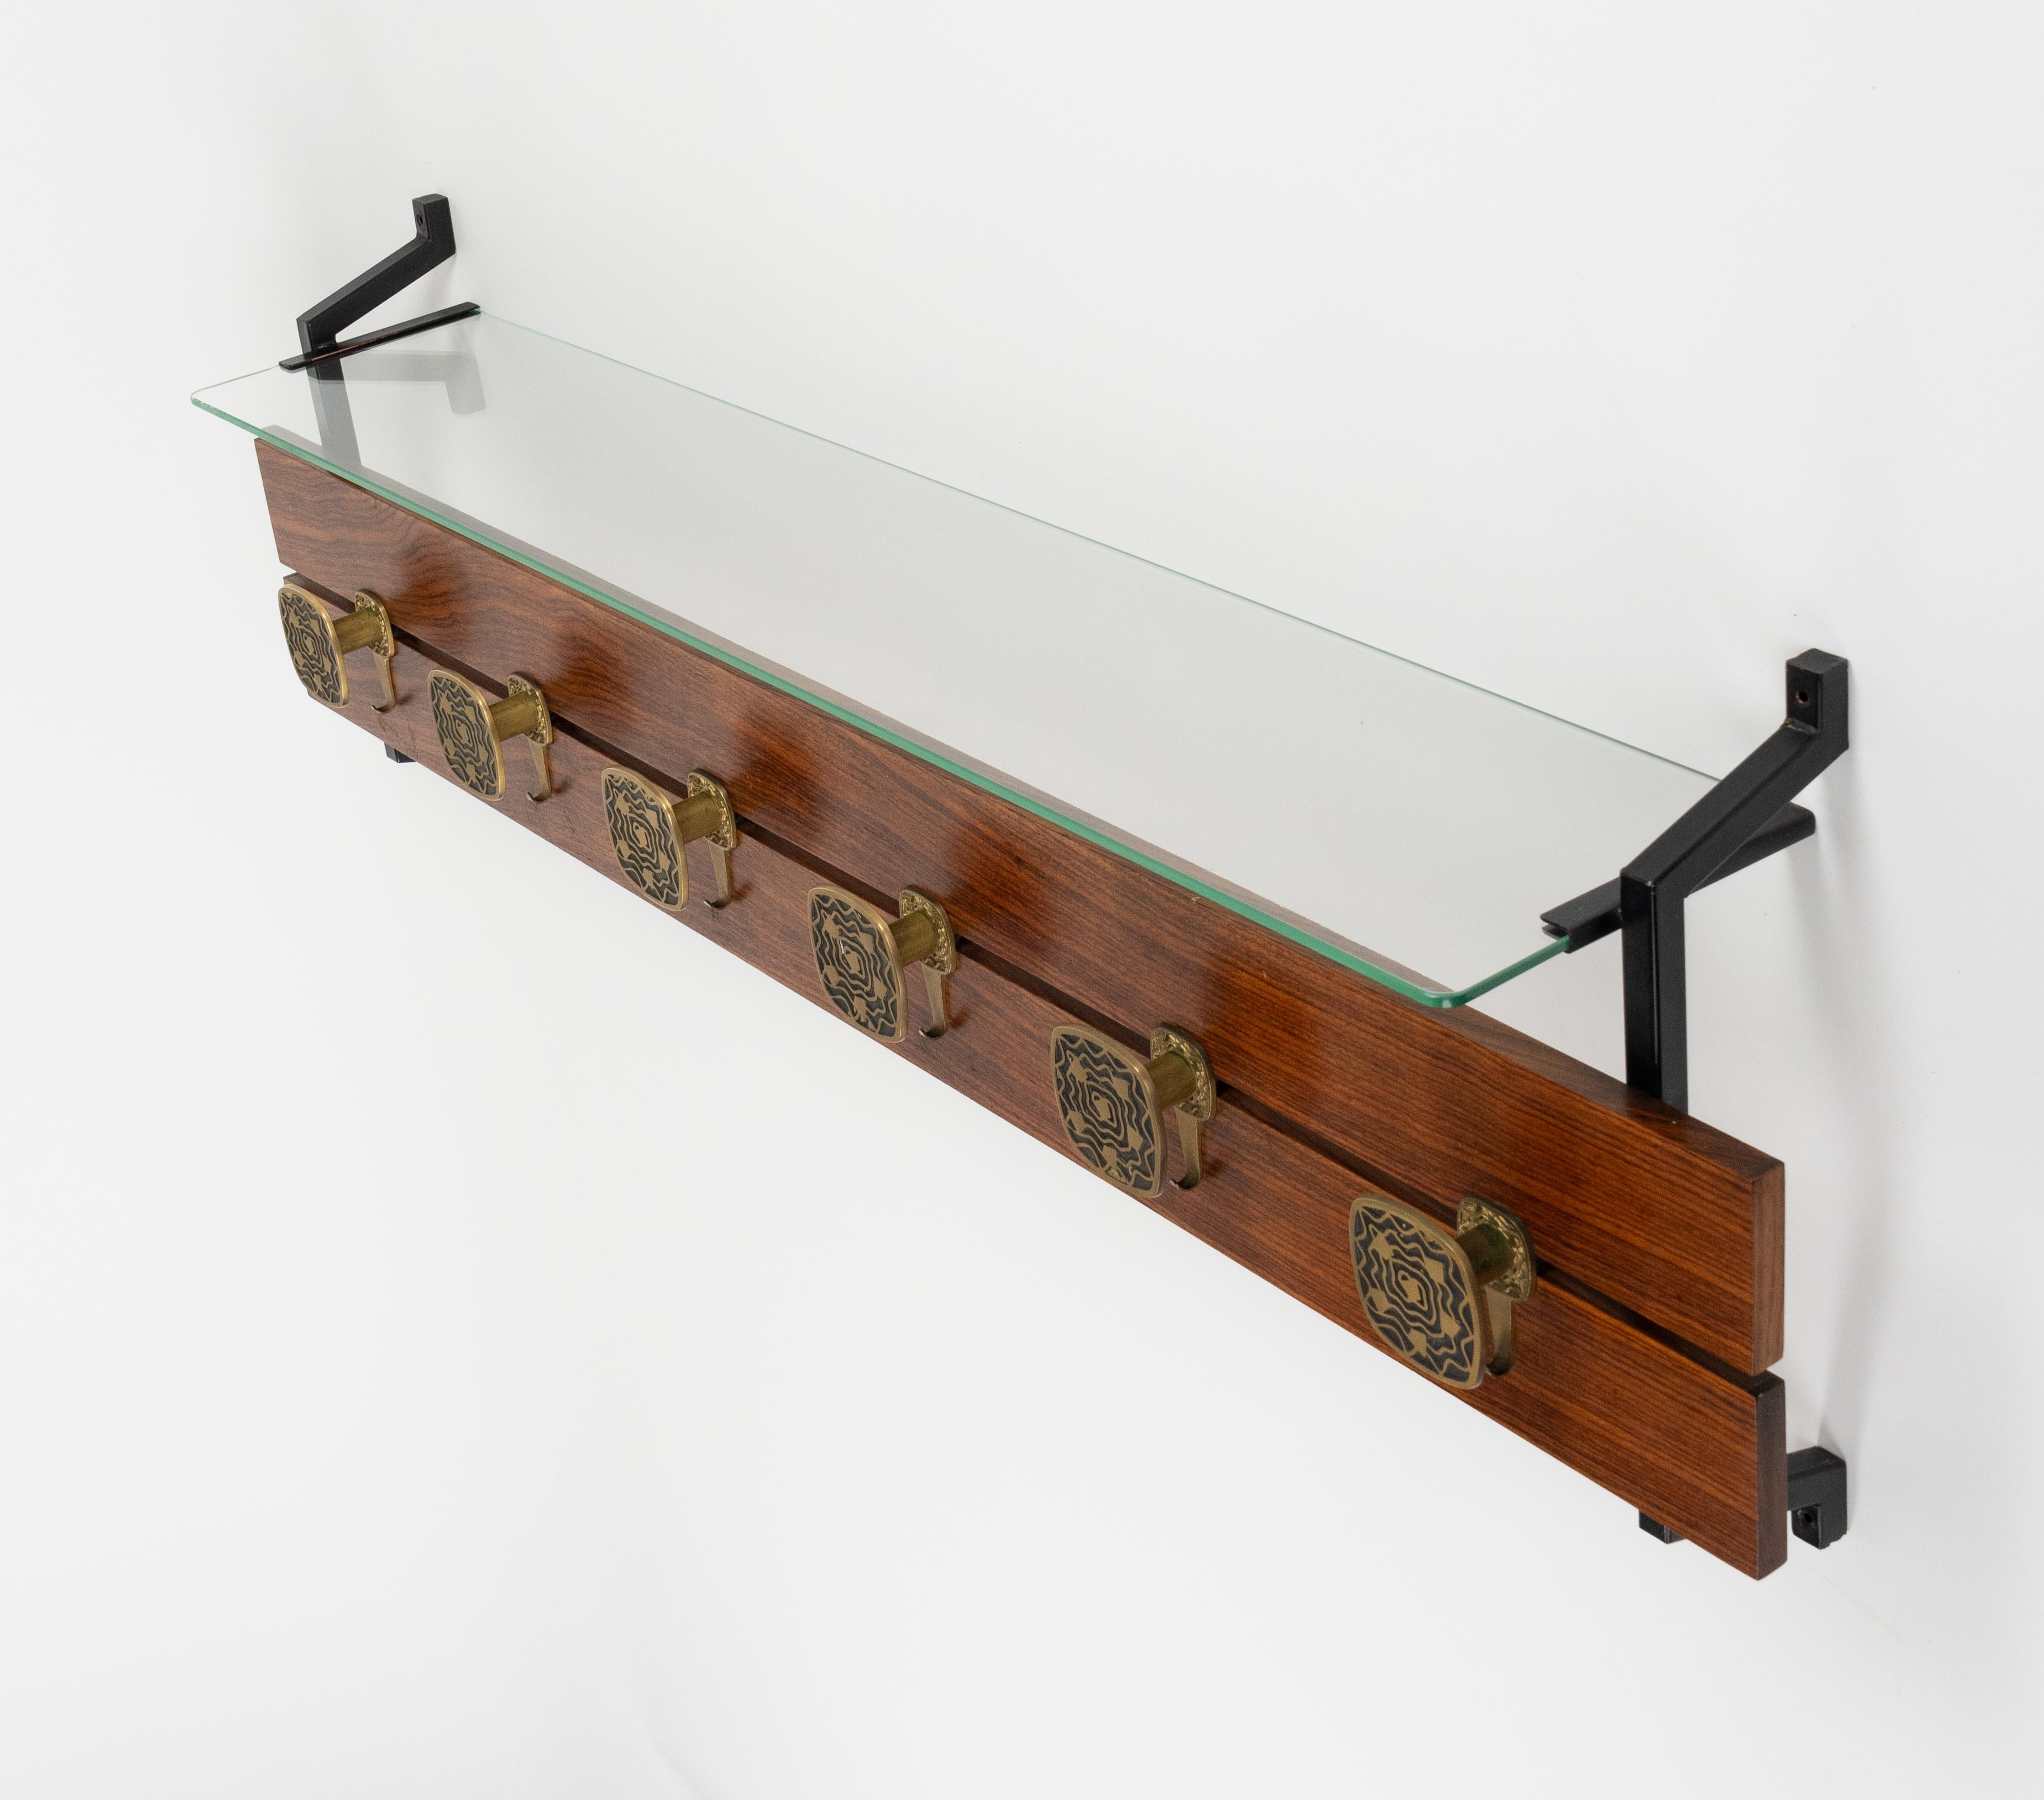 Midcentury Wood, Glass and Brass Coat Rack Herta Baller Style, Italy 1970s For Sale 3